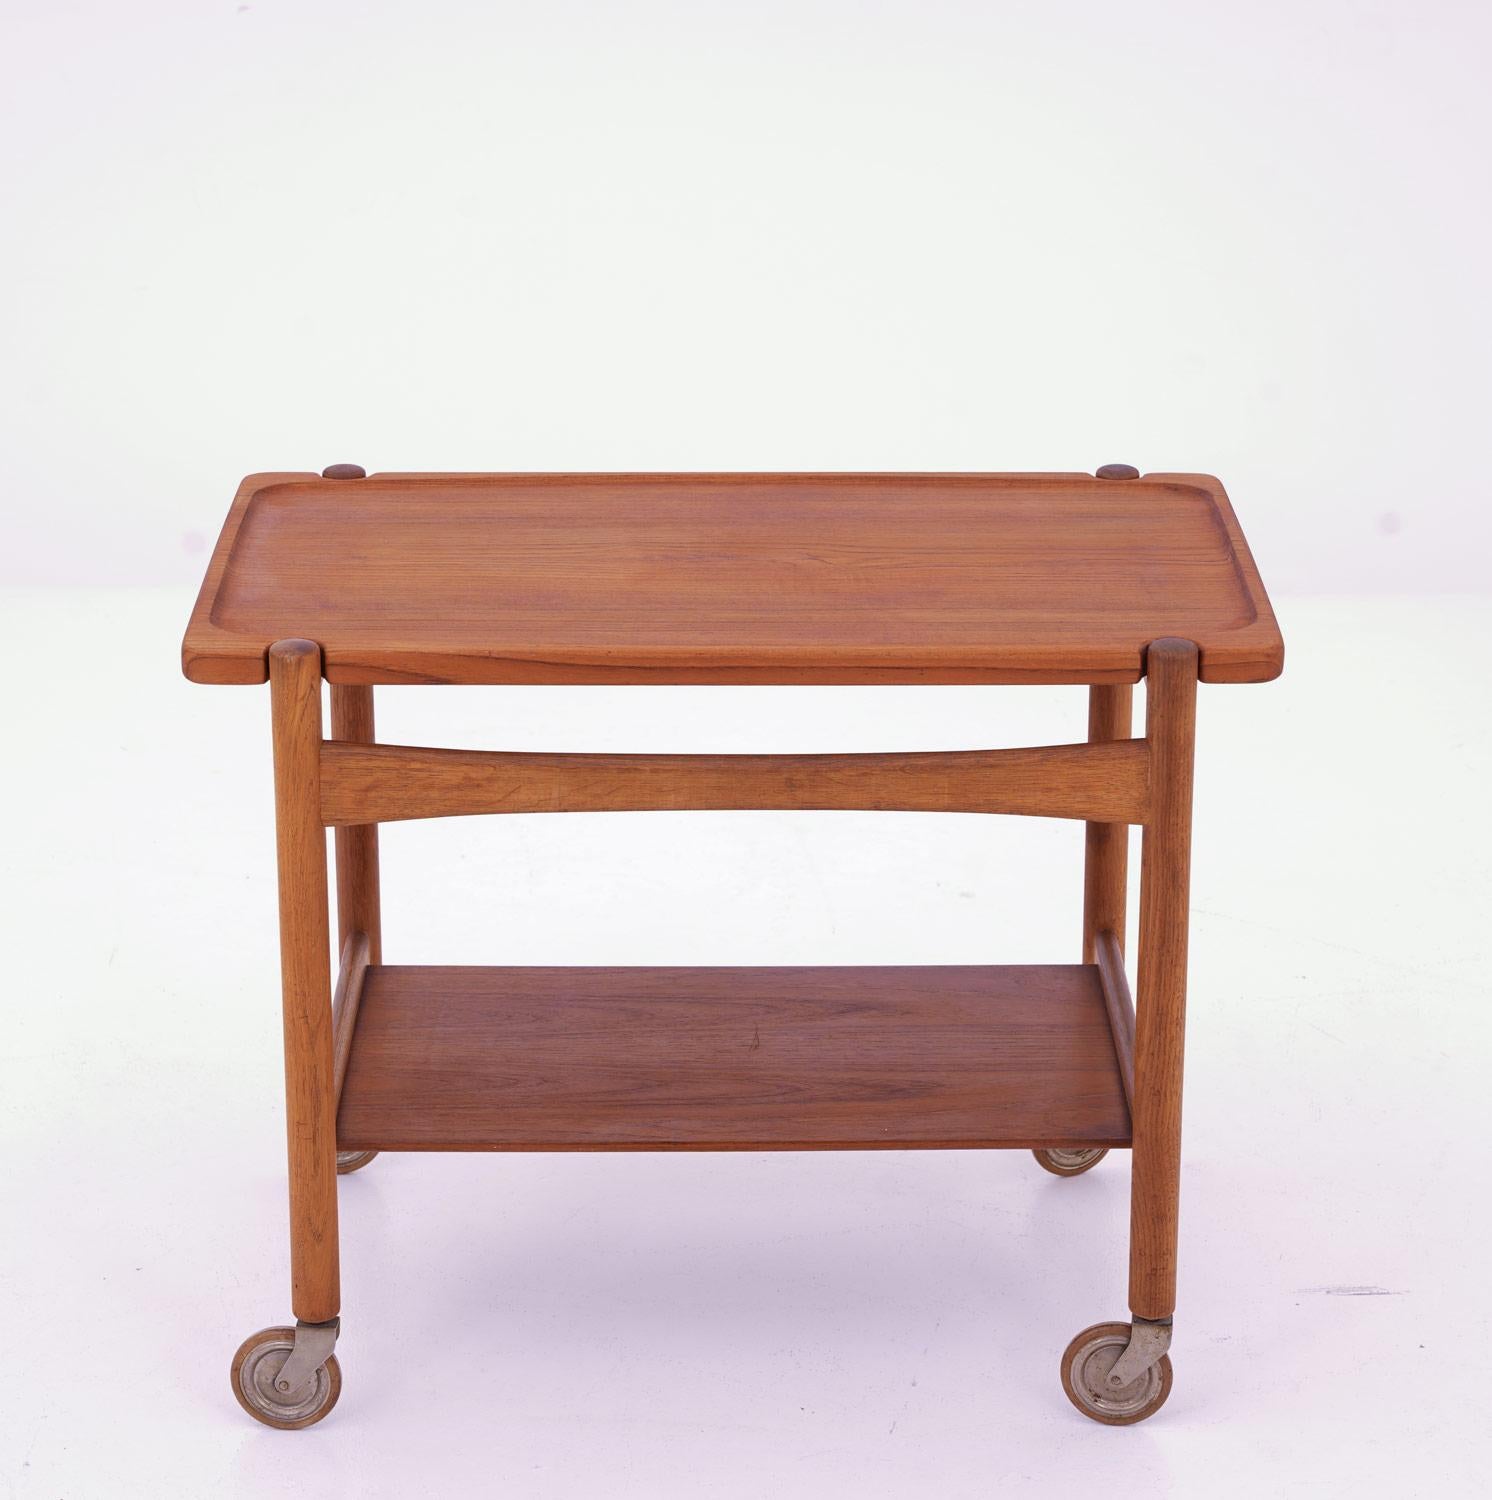 Beautiful design and well matched materials make this piece a good fit in a modern home. It consists of a solid teak top board, resting on an oak frame.

Condition: The table top has been sanded down and refinished, while the frame is just cleaned